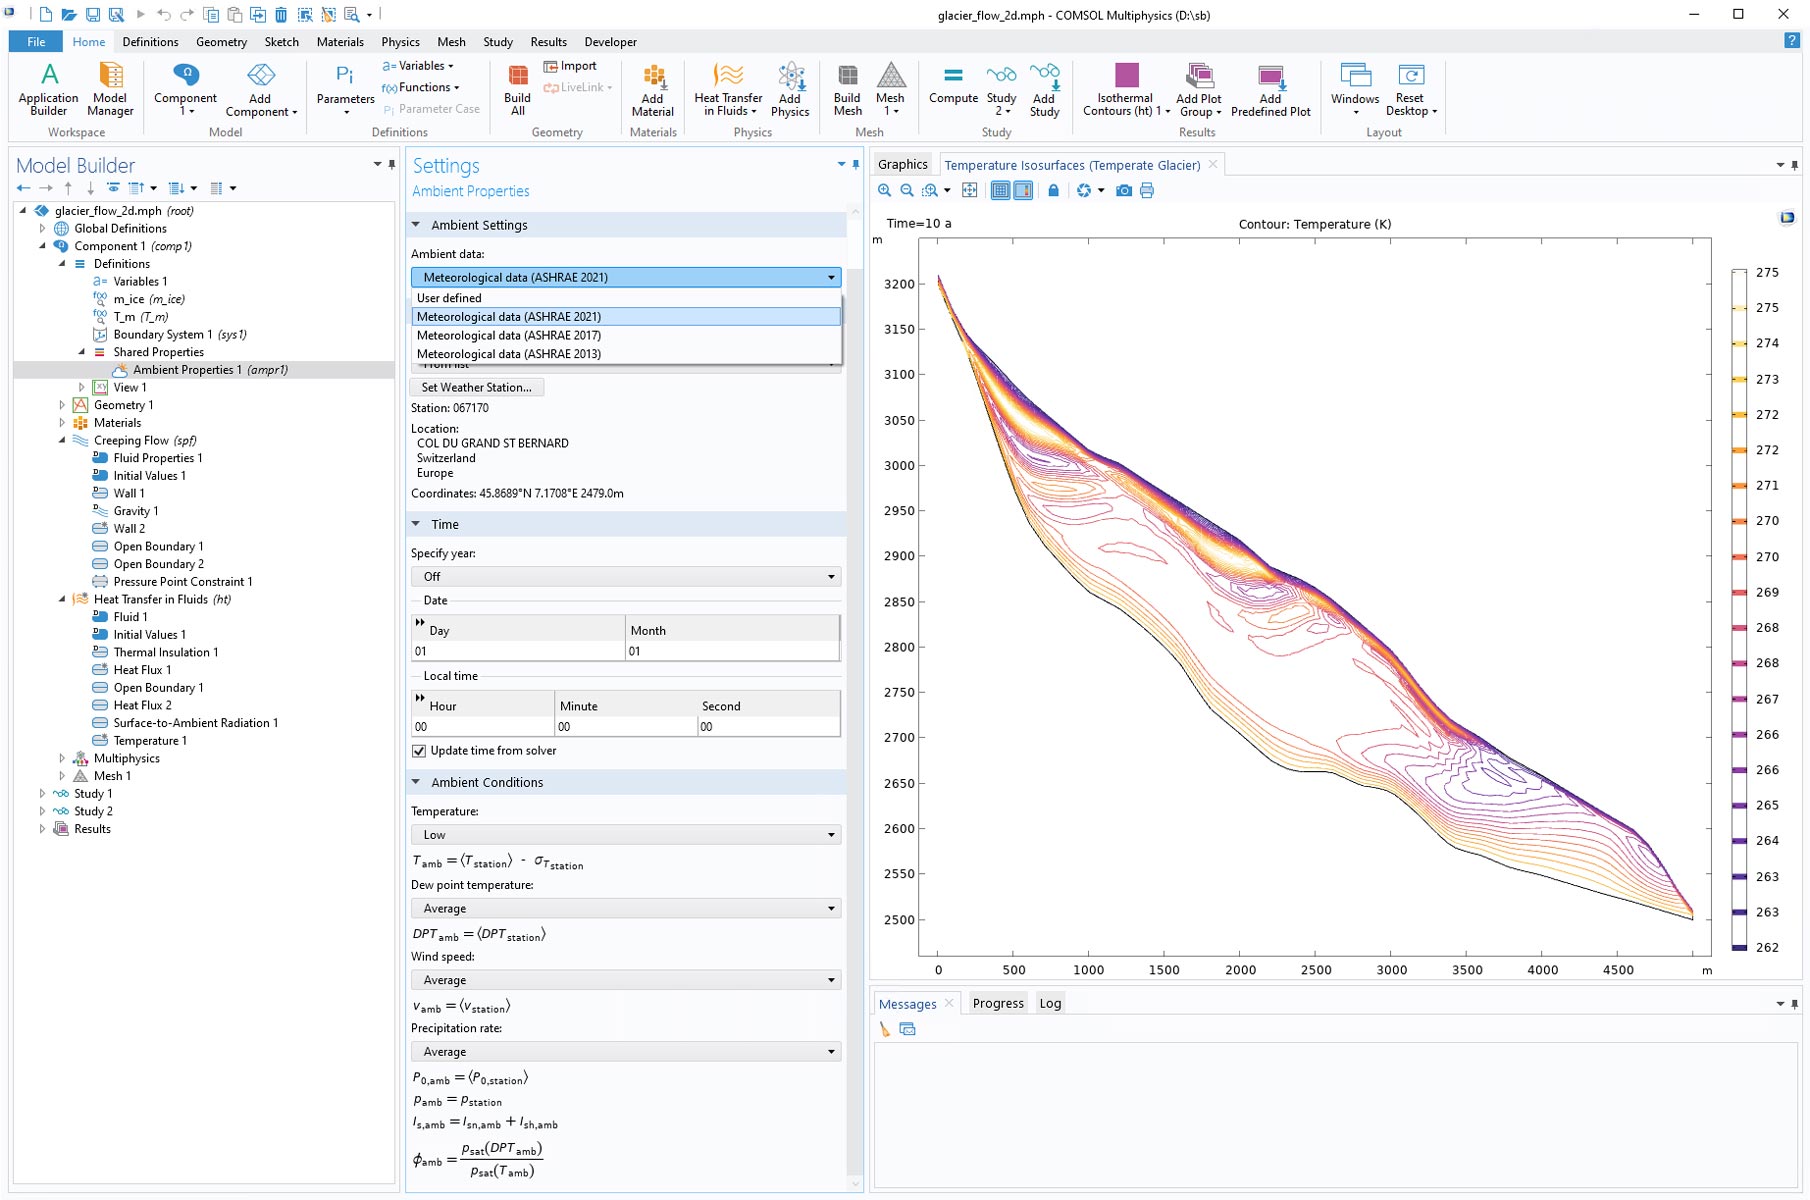 The COMSOL Multiphysics UI showing the Model Builder window with the Ambient Properties node highlighted, the corresponding Settings window showing the ASHRAE 2021 data available, and the Graphics window with the Glacier Flow model.